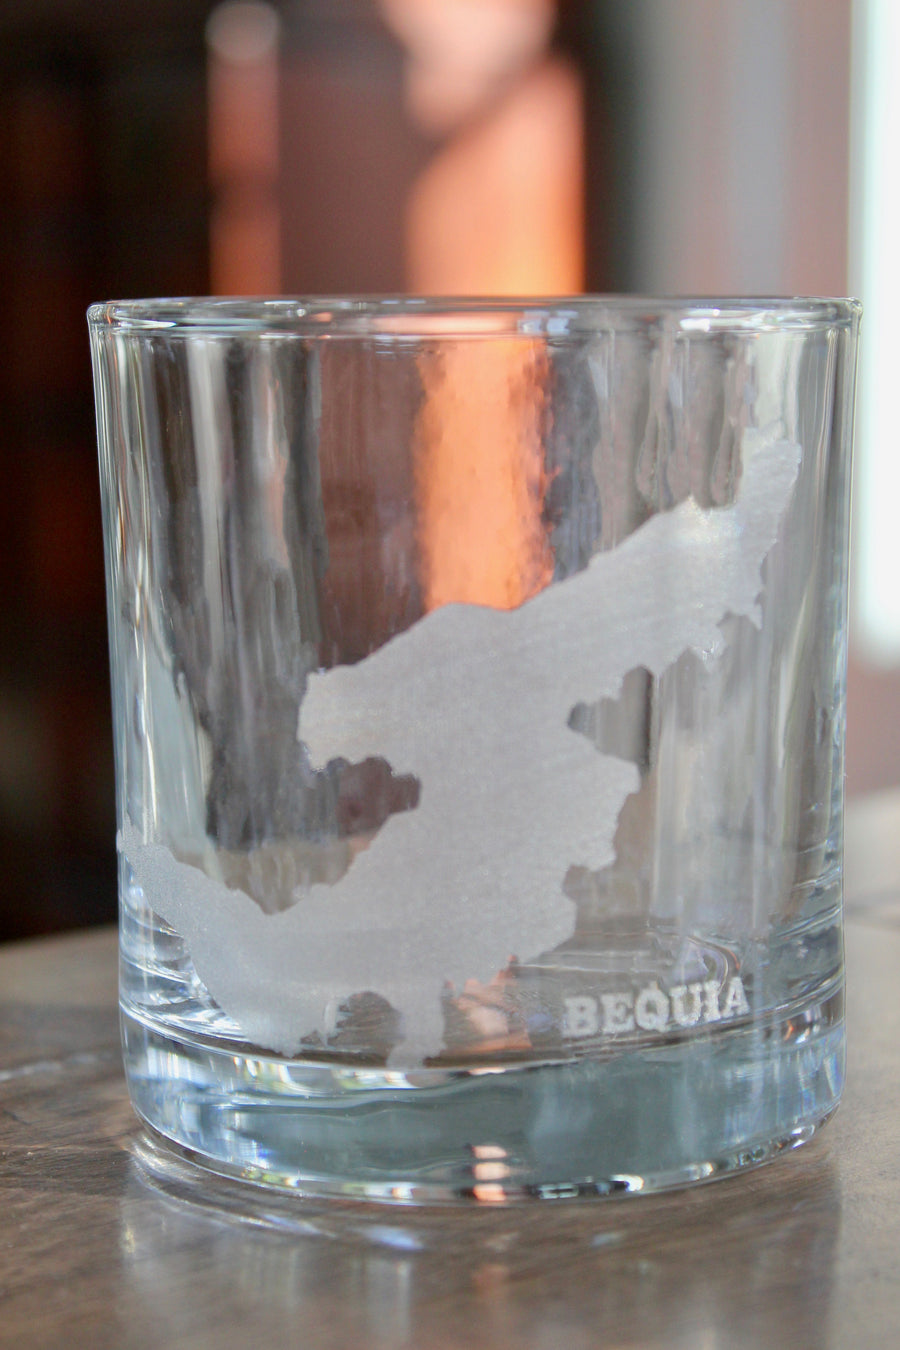 Bequia Map Engraved Glasses